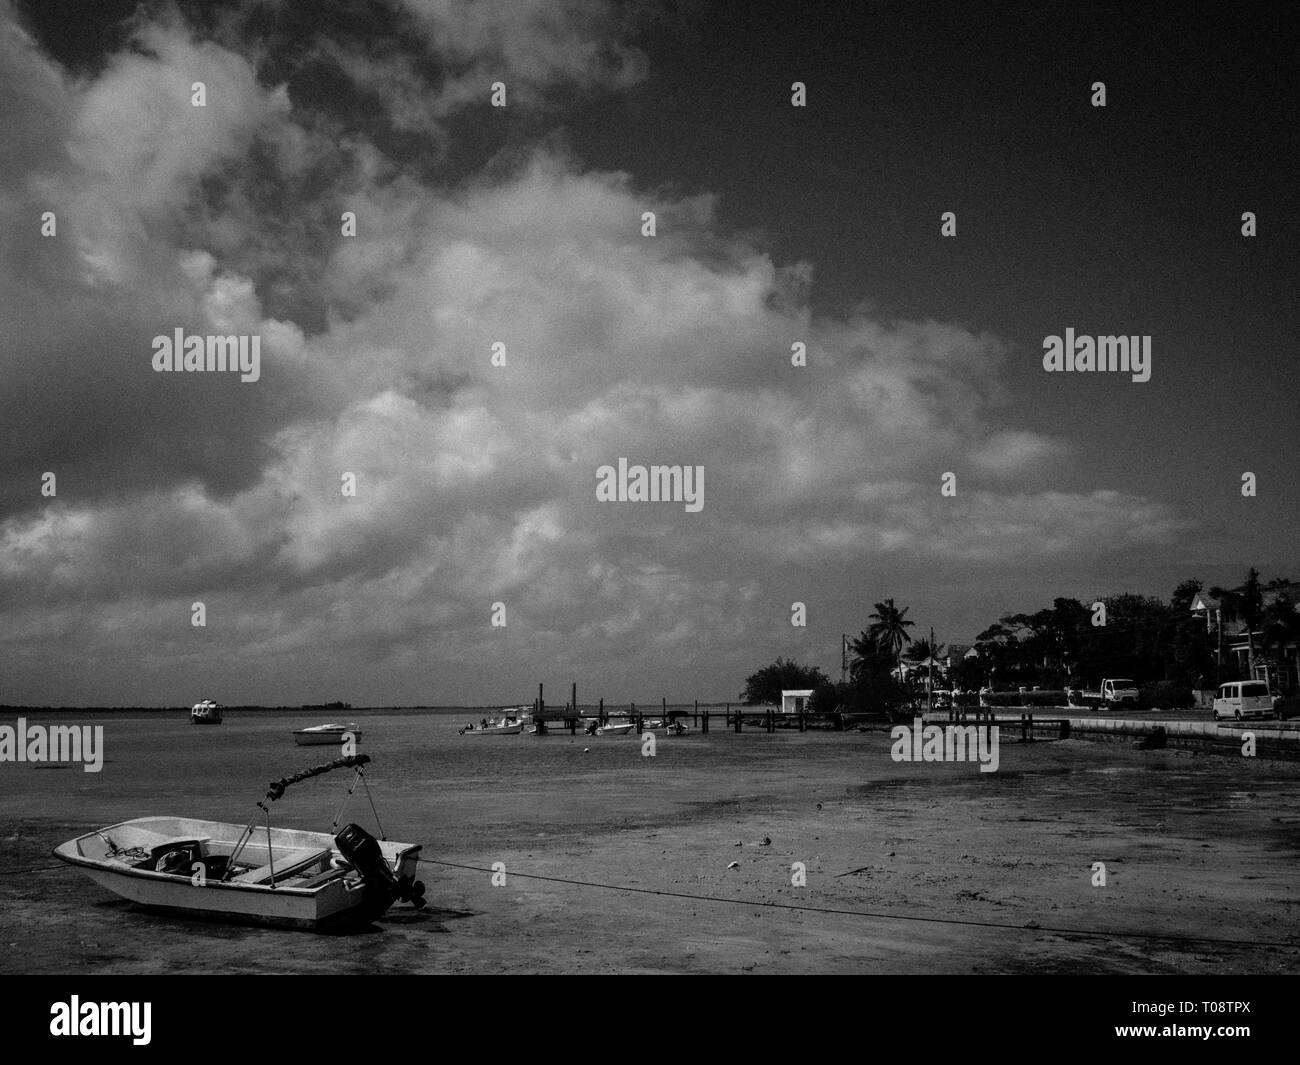 Black and White Landscape Photograph of Dunmore Town, Harbour Island, Eleuthera, The Bahamas. Stock Photo